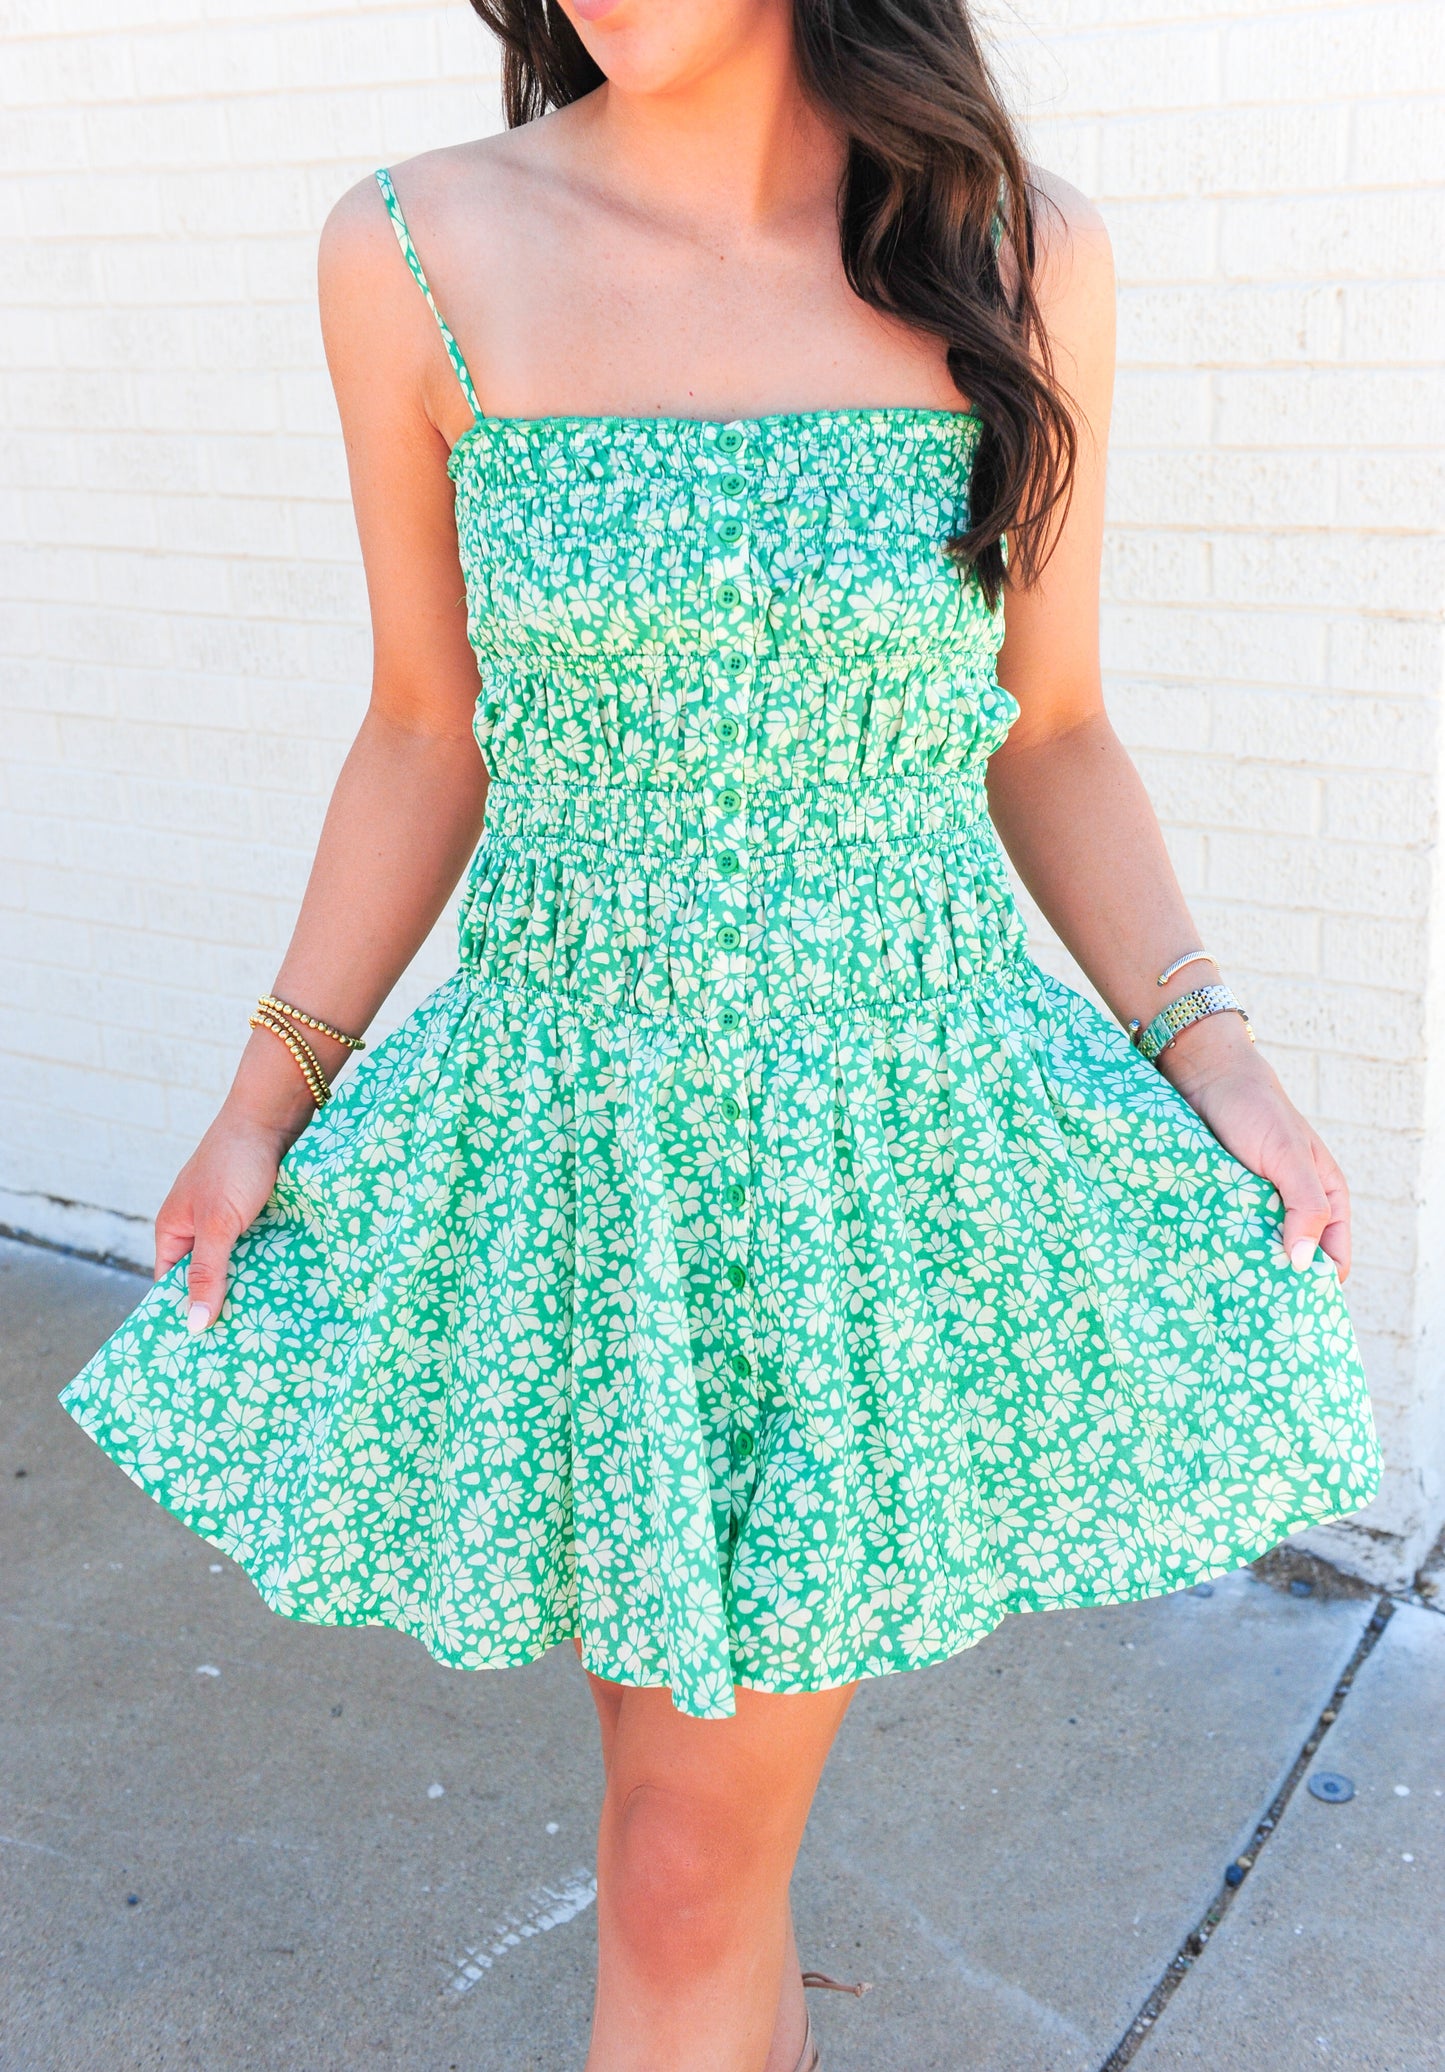 THE FLORAL SUNDRESS